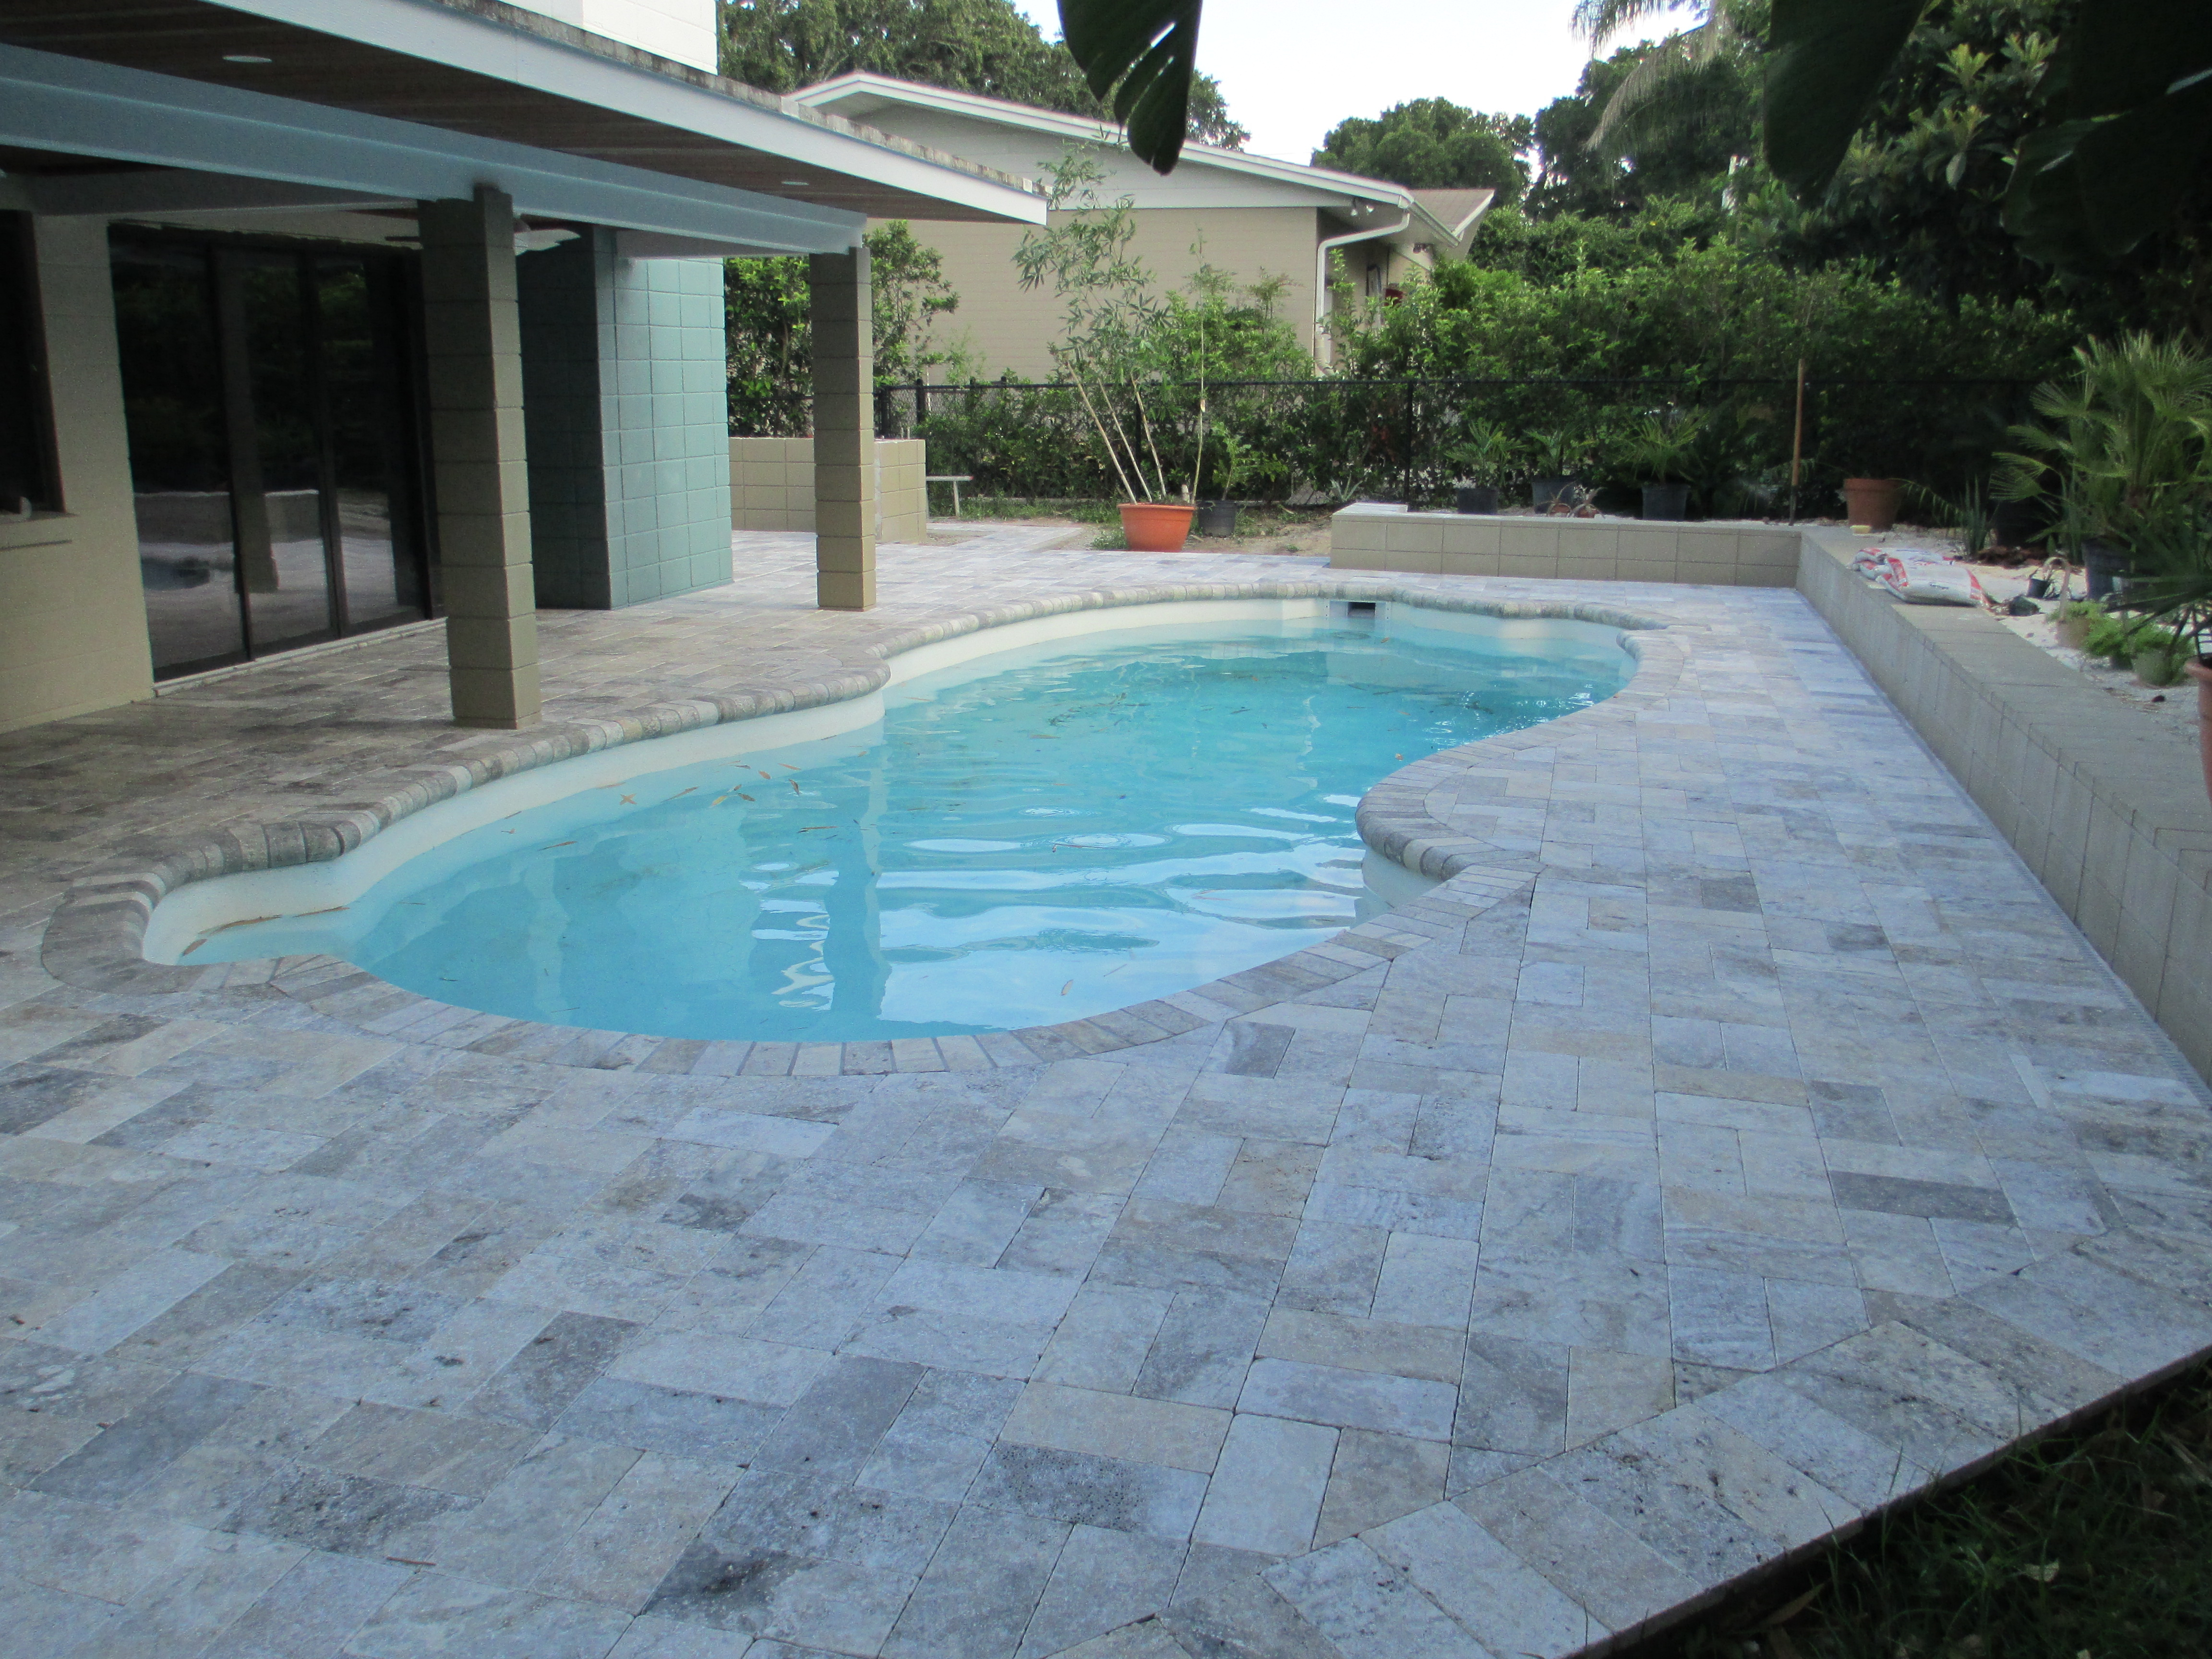 Travertine Pavers This Tips For Pool Deck Pavers This Tips For throughout measurements 4608 X 3456